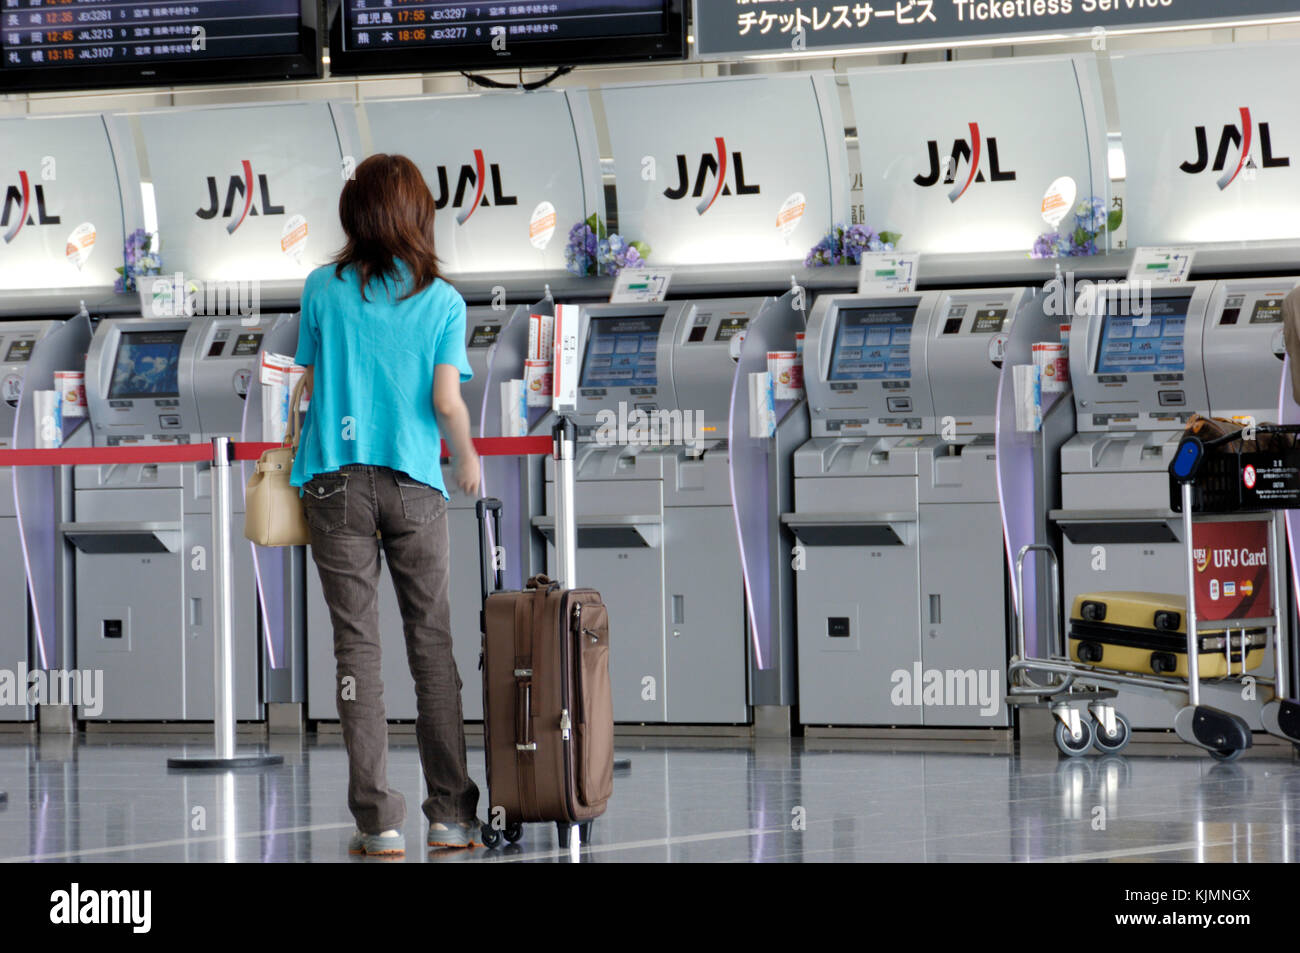 passenger at the JAL Ticket Reservations Desk in main airport terminal building Stock Photo